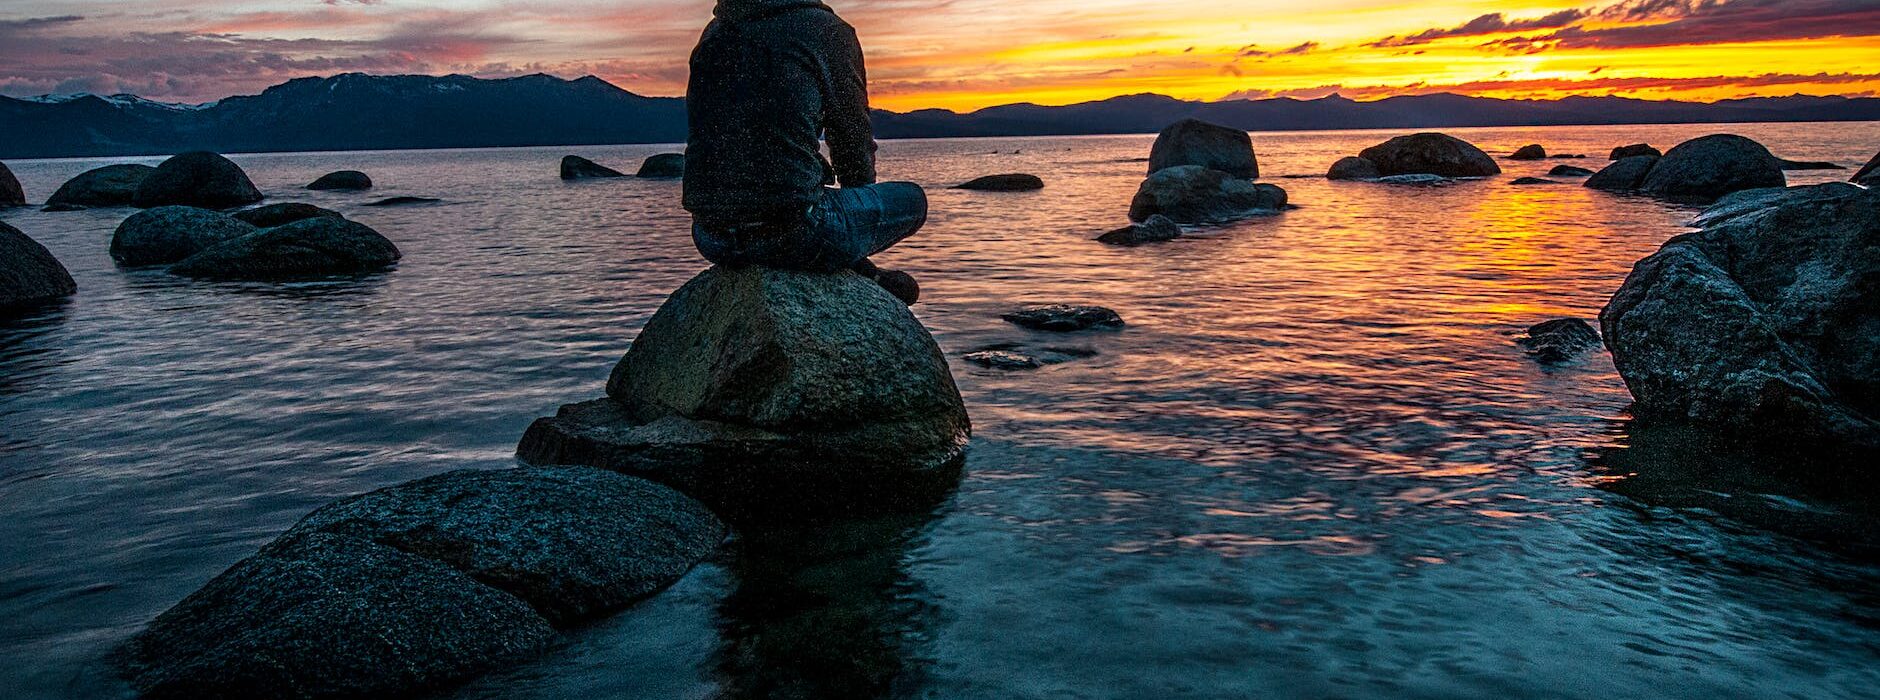 person sitting on rock on body of water